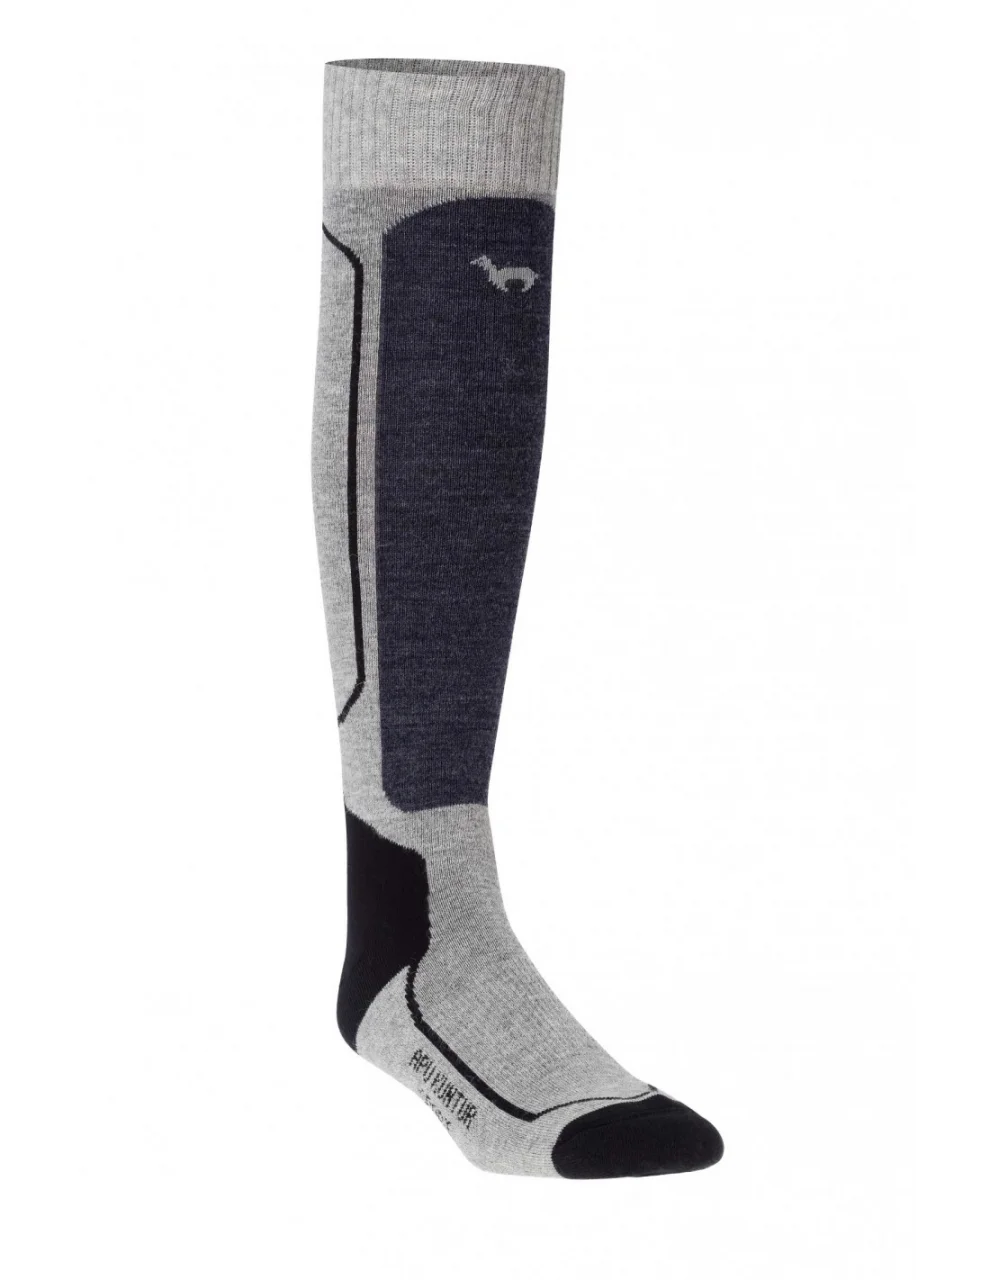 PREMIUM Sport and Horse Racing socks for women and men in Alpaca and Pima Cotton blend_86344